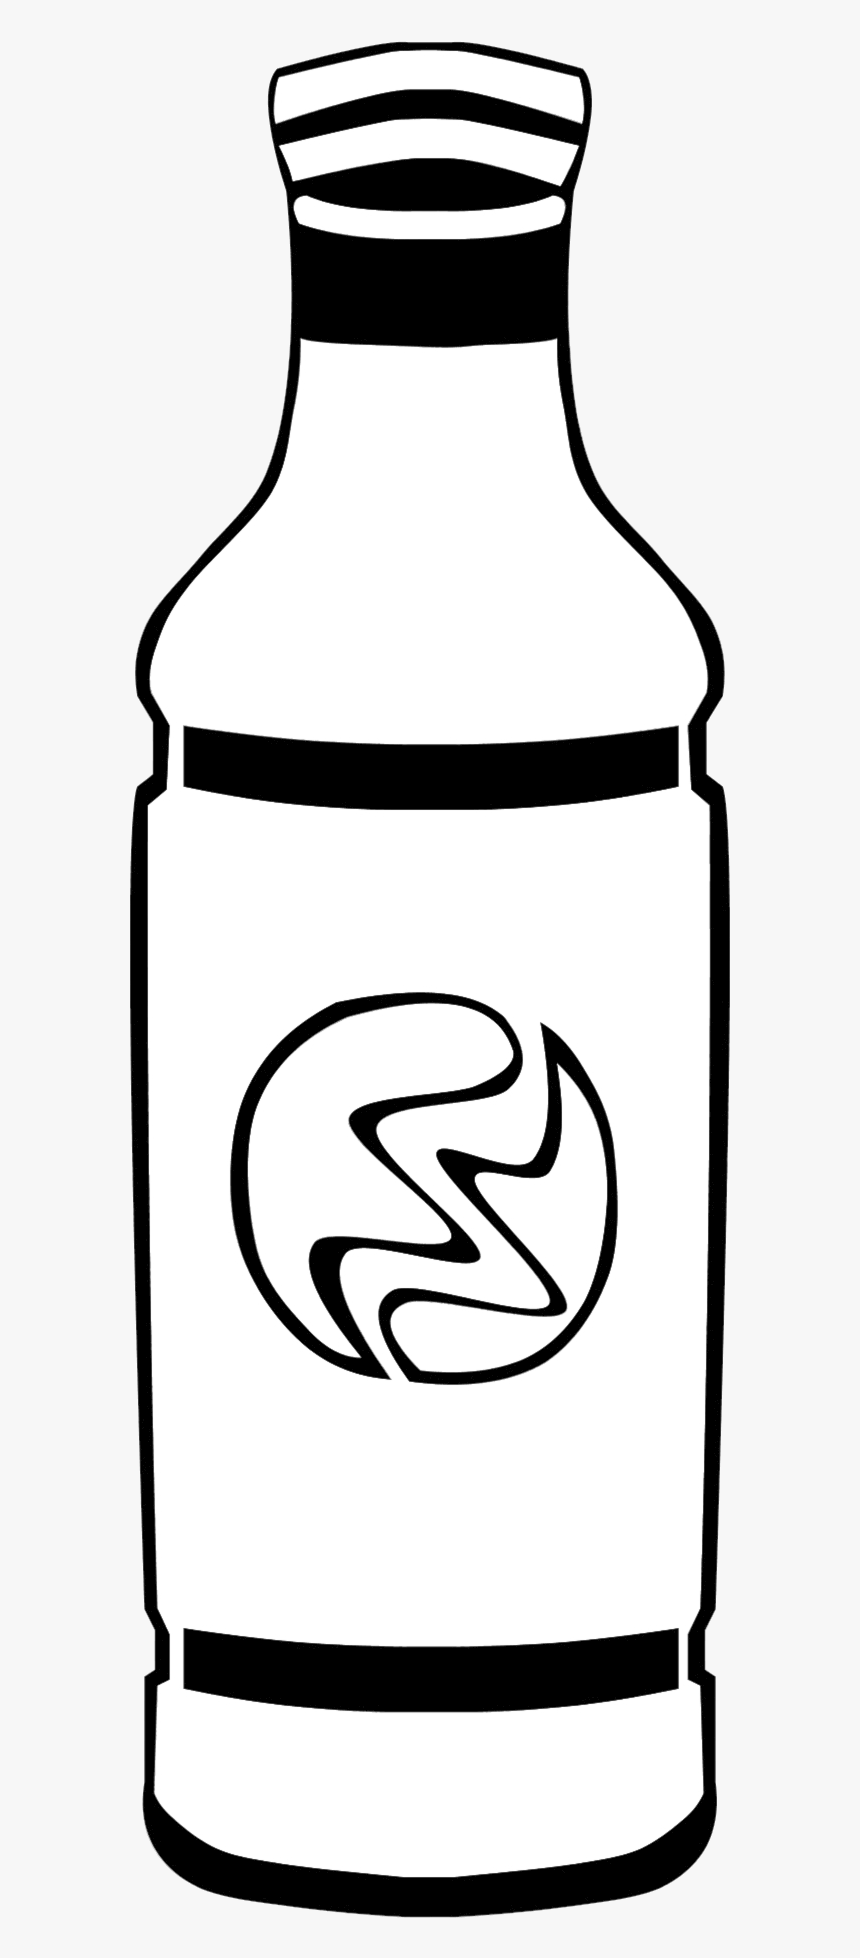 Soda Can Image For Clipart Juice Bottle Black And White - Bottle Of Juice Clipart Black And White, HD Png Download, Free Download